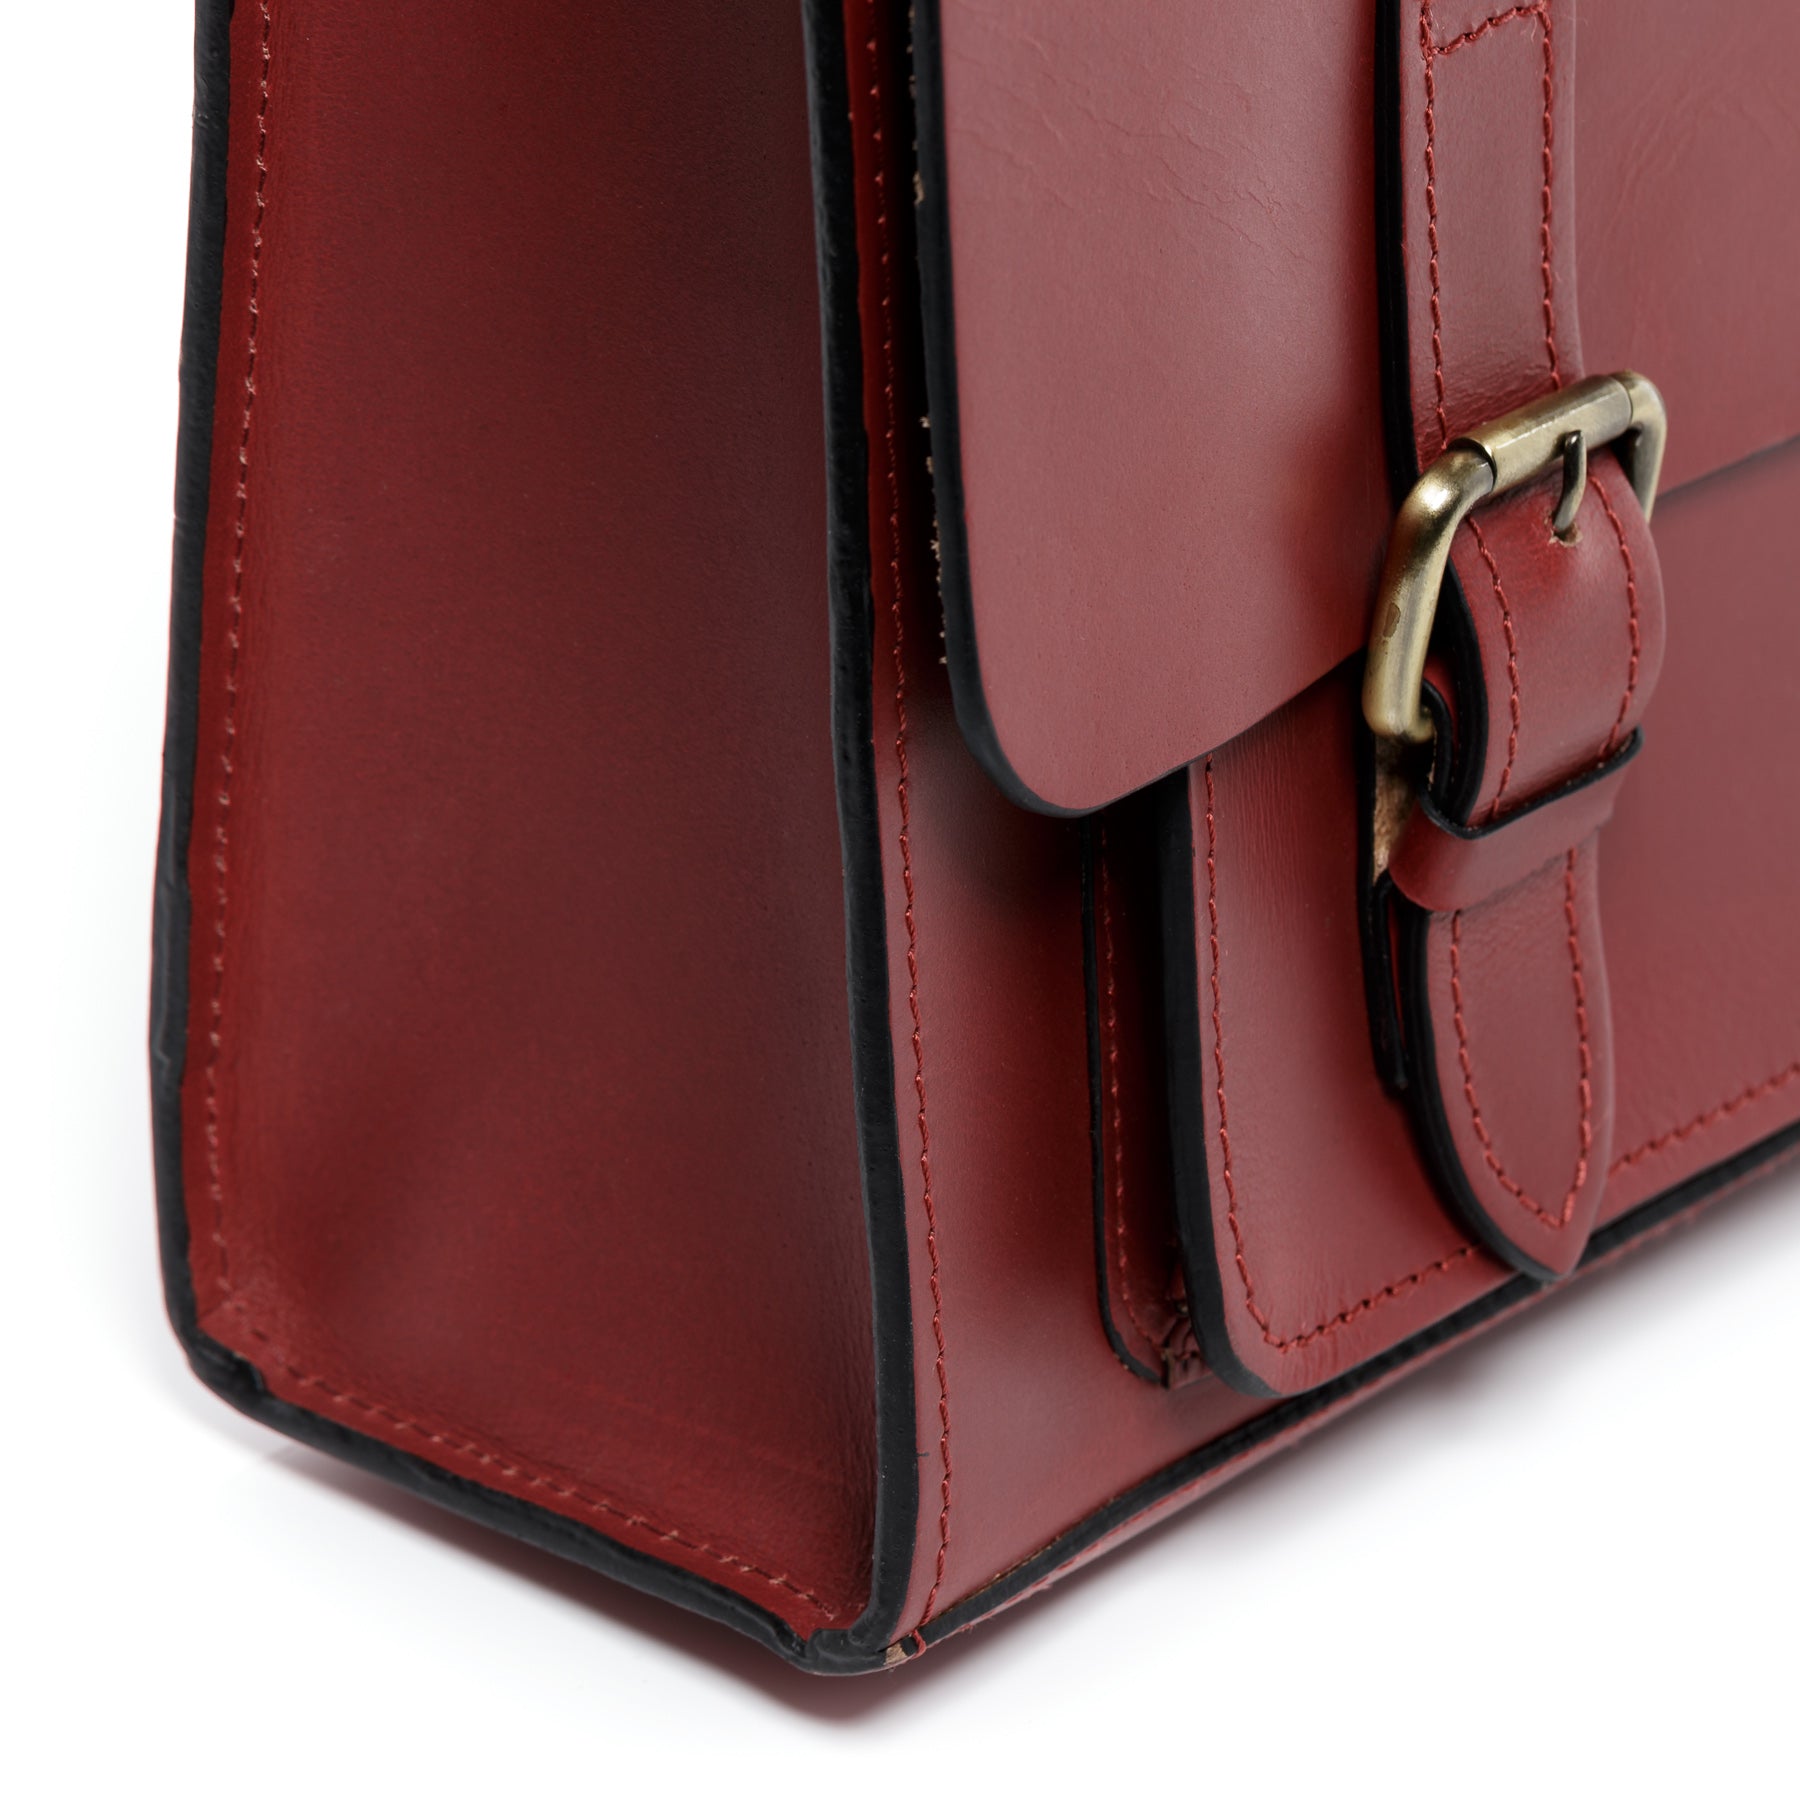 Briefcase BRISTOL saddle leather red